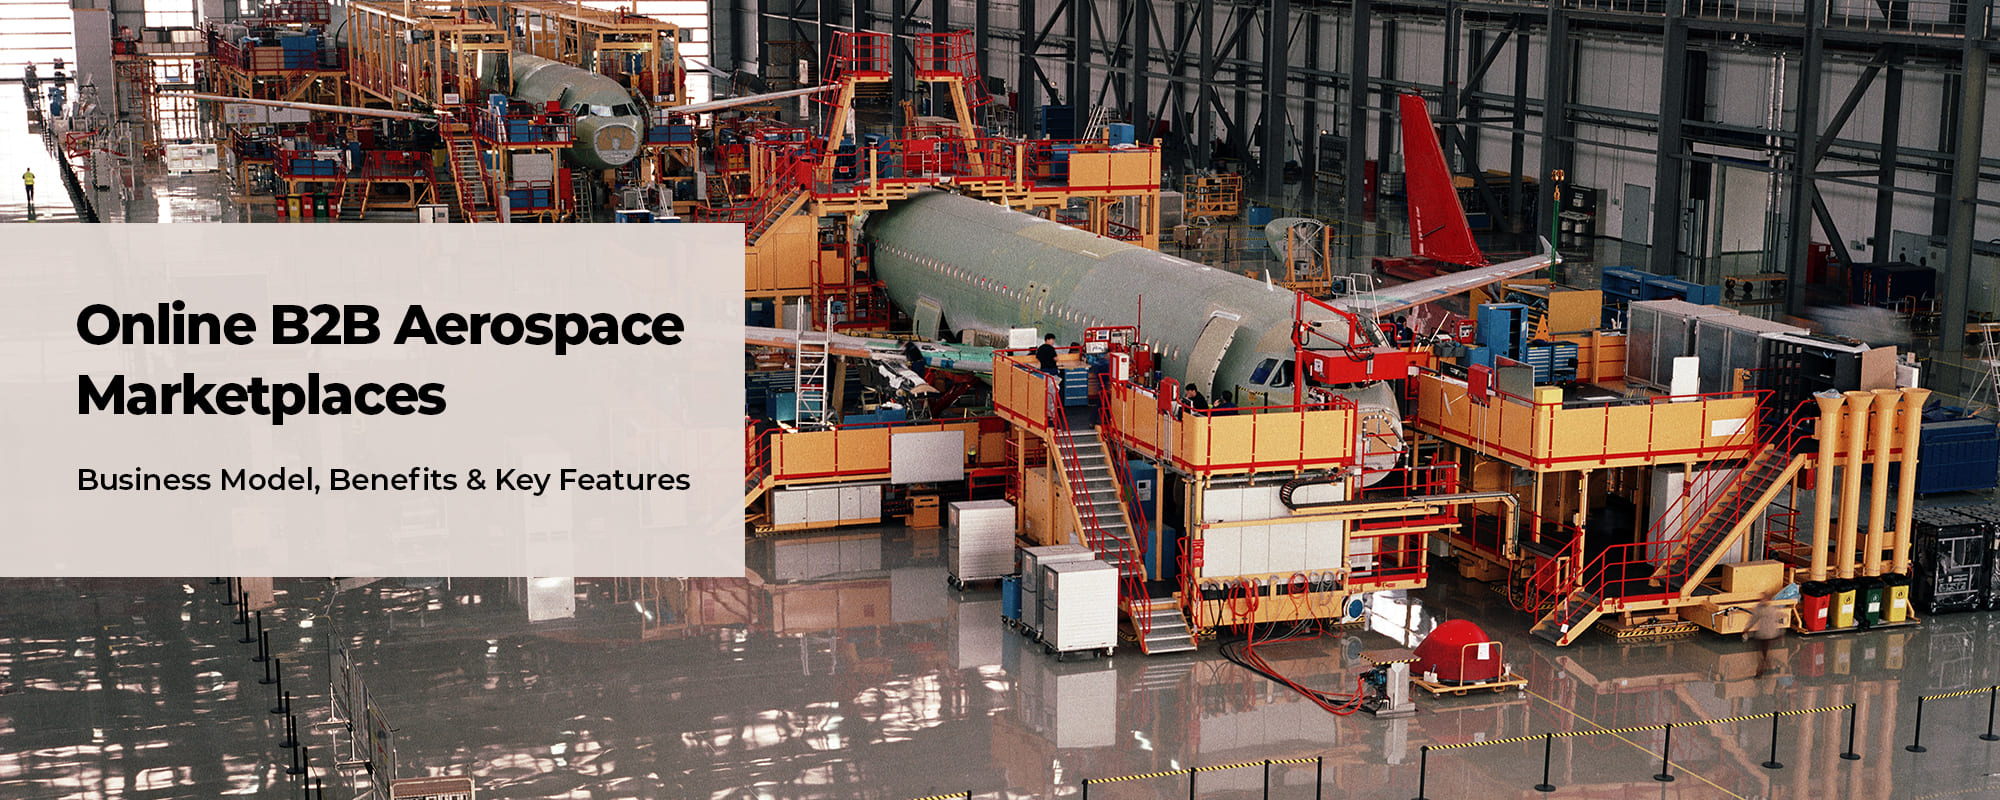 How Online B2B Marketplaces Can Redefine The Aerospace Industry